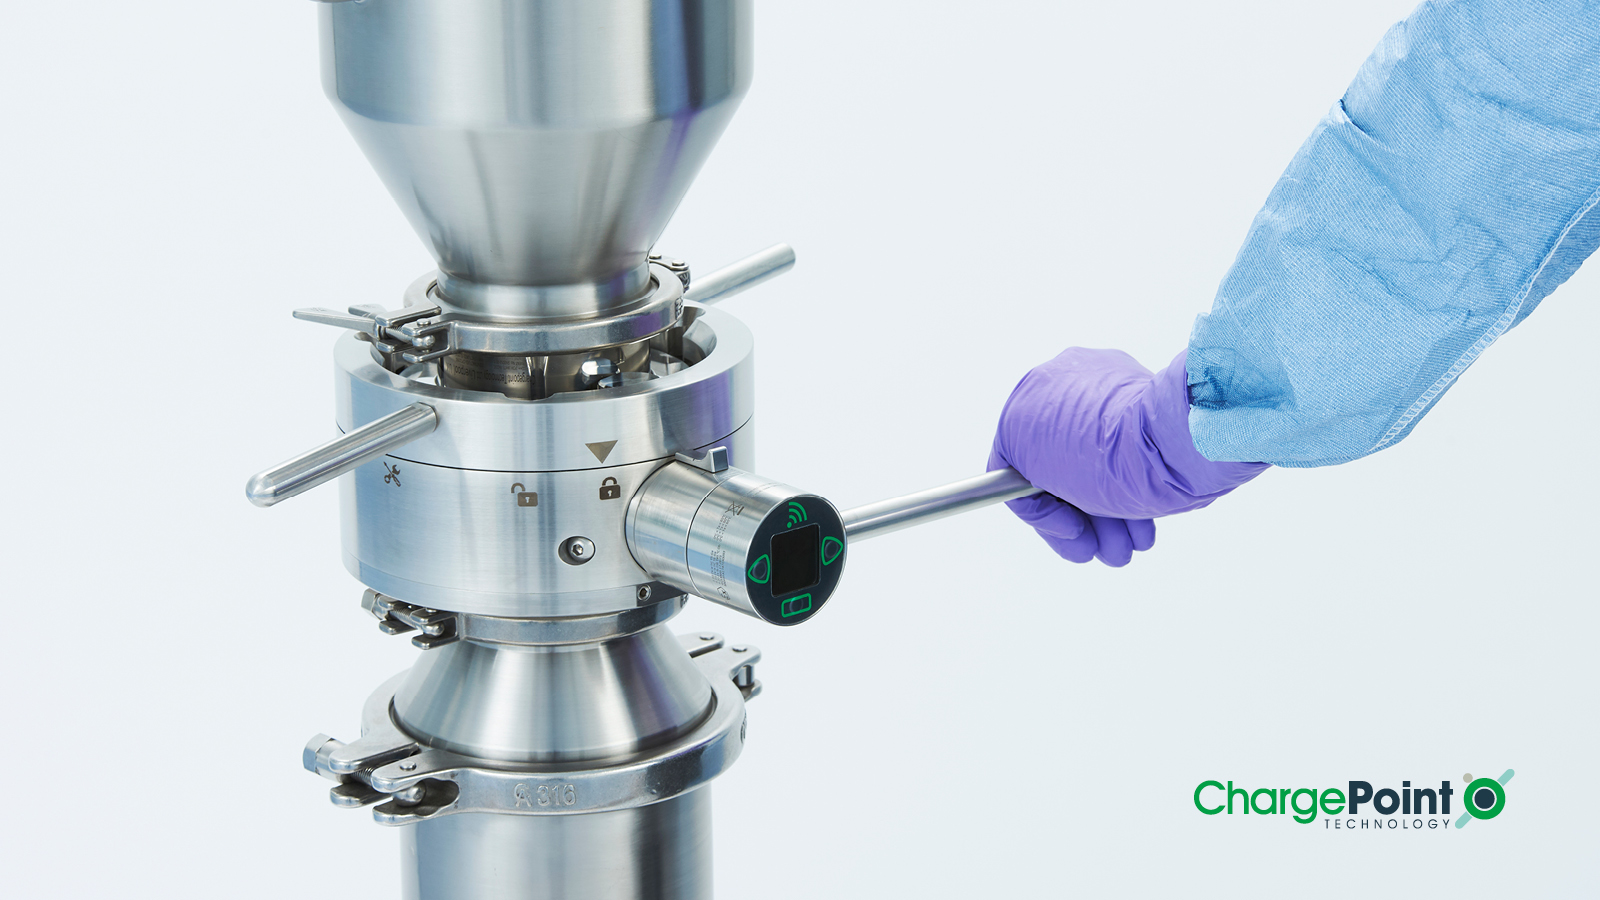 ChargePoint executive Christian Dunne gives his expert take on the sterile and aseptic markets